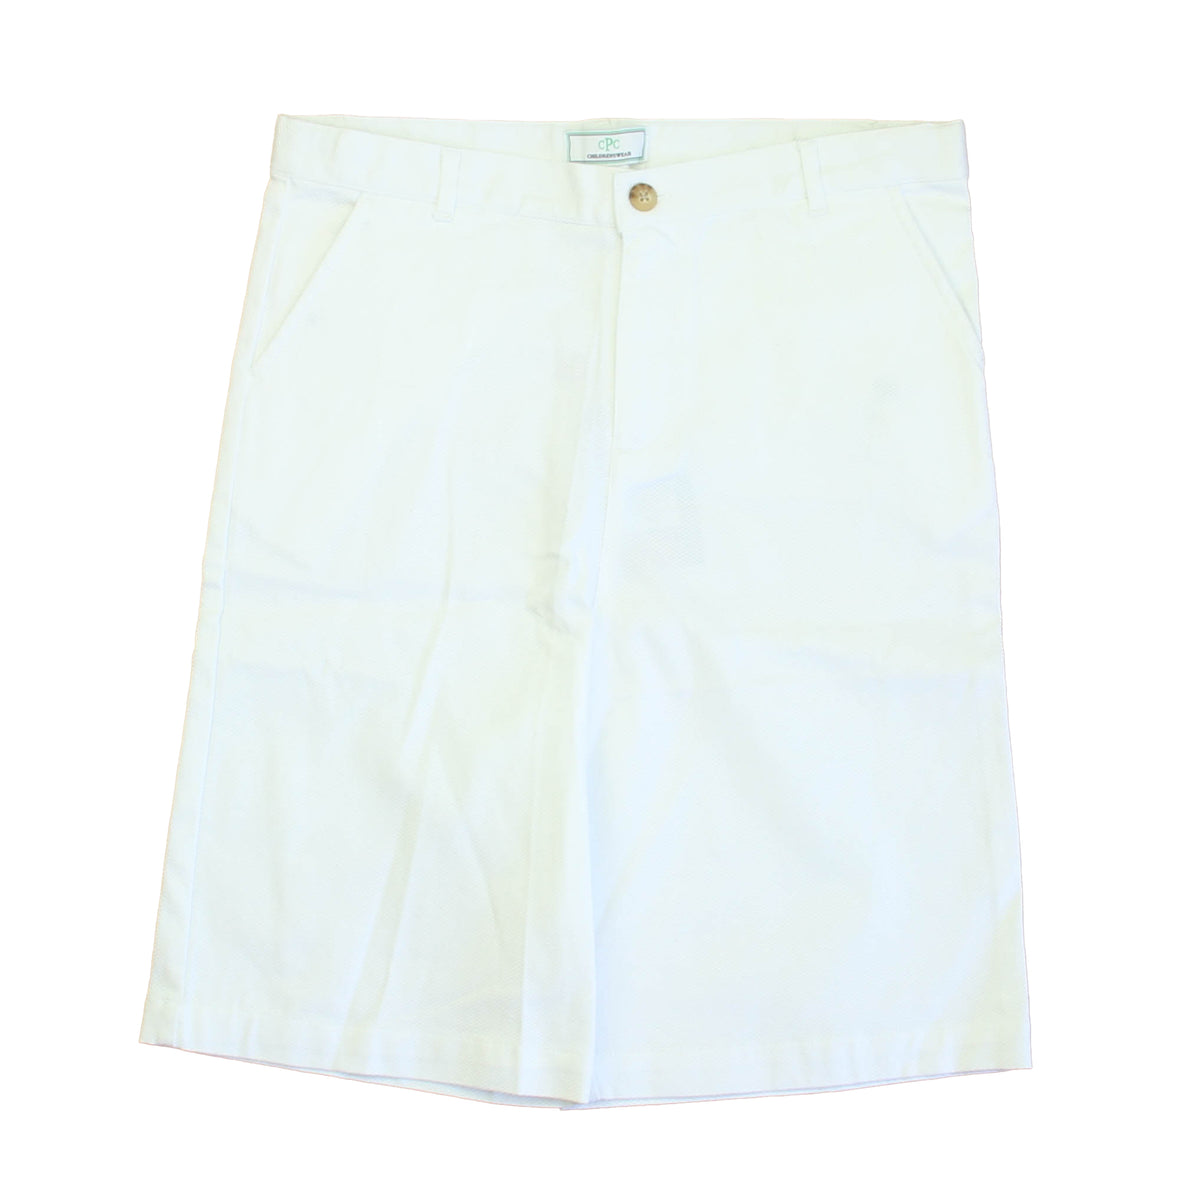 New with Tags: Bright White Shorts size: 6-14 Years -- FINAL SALE